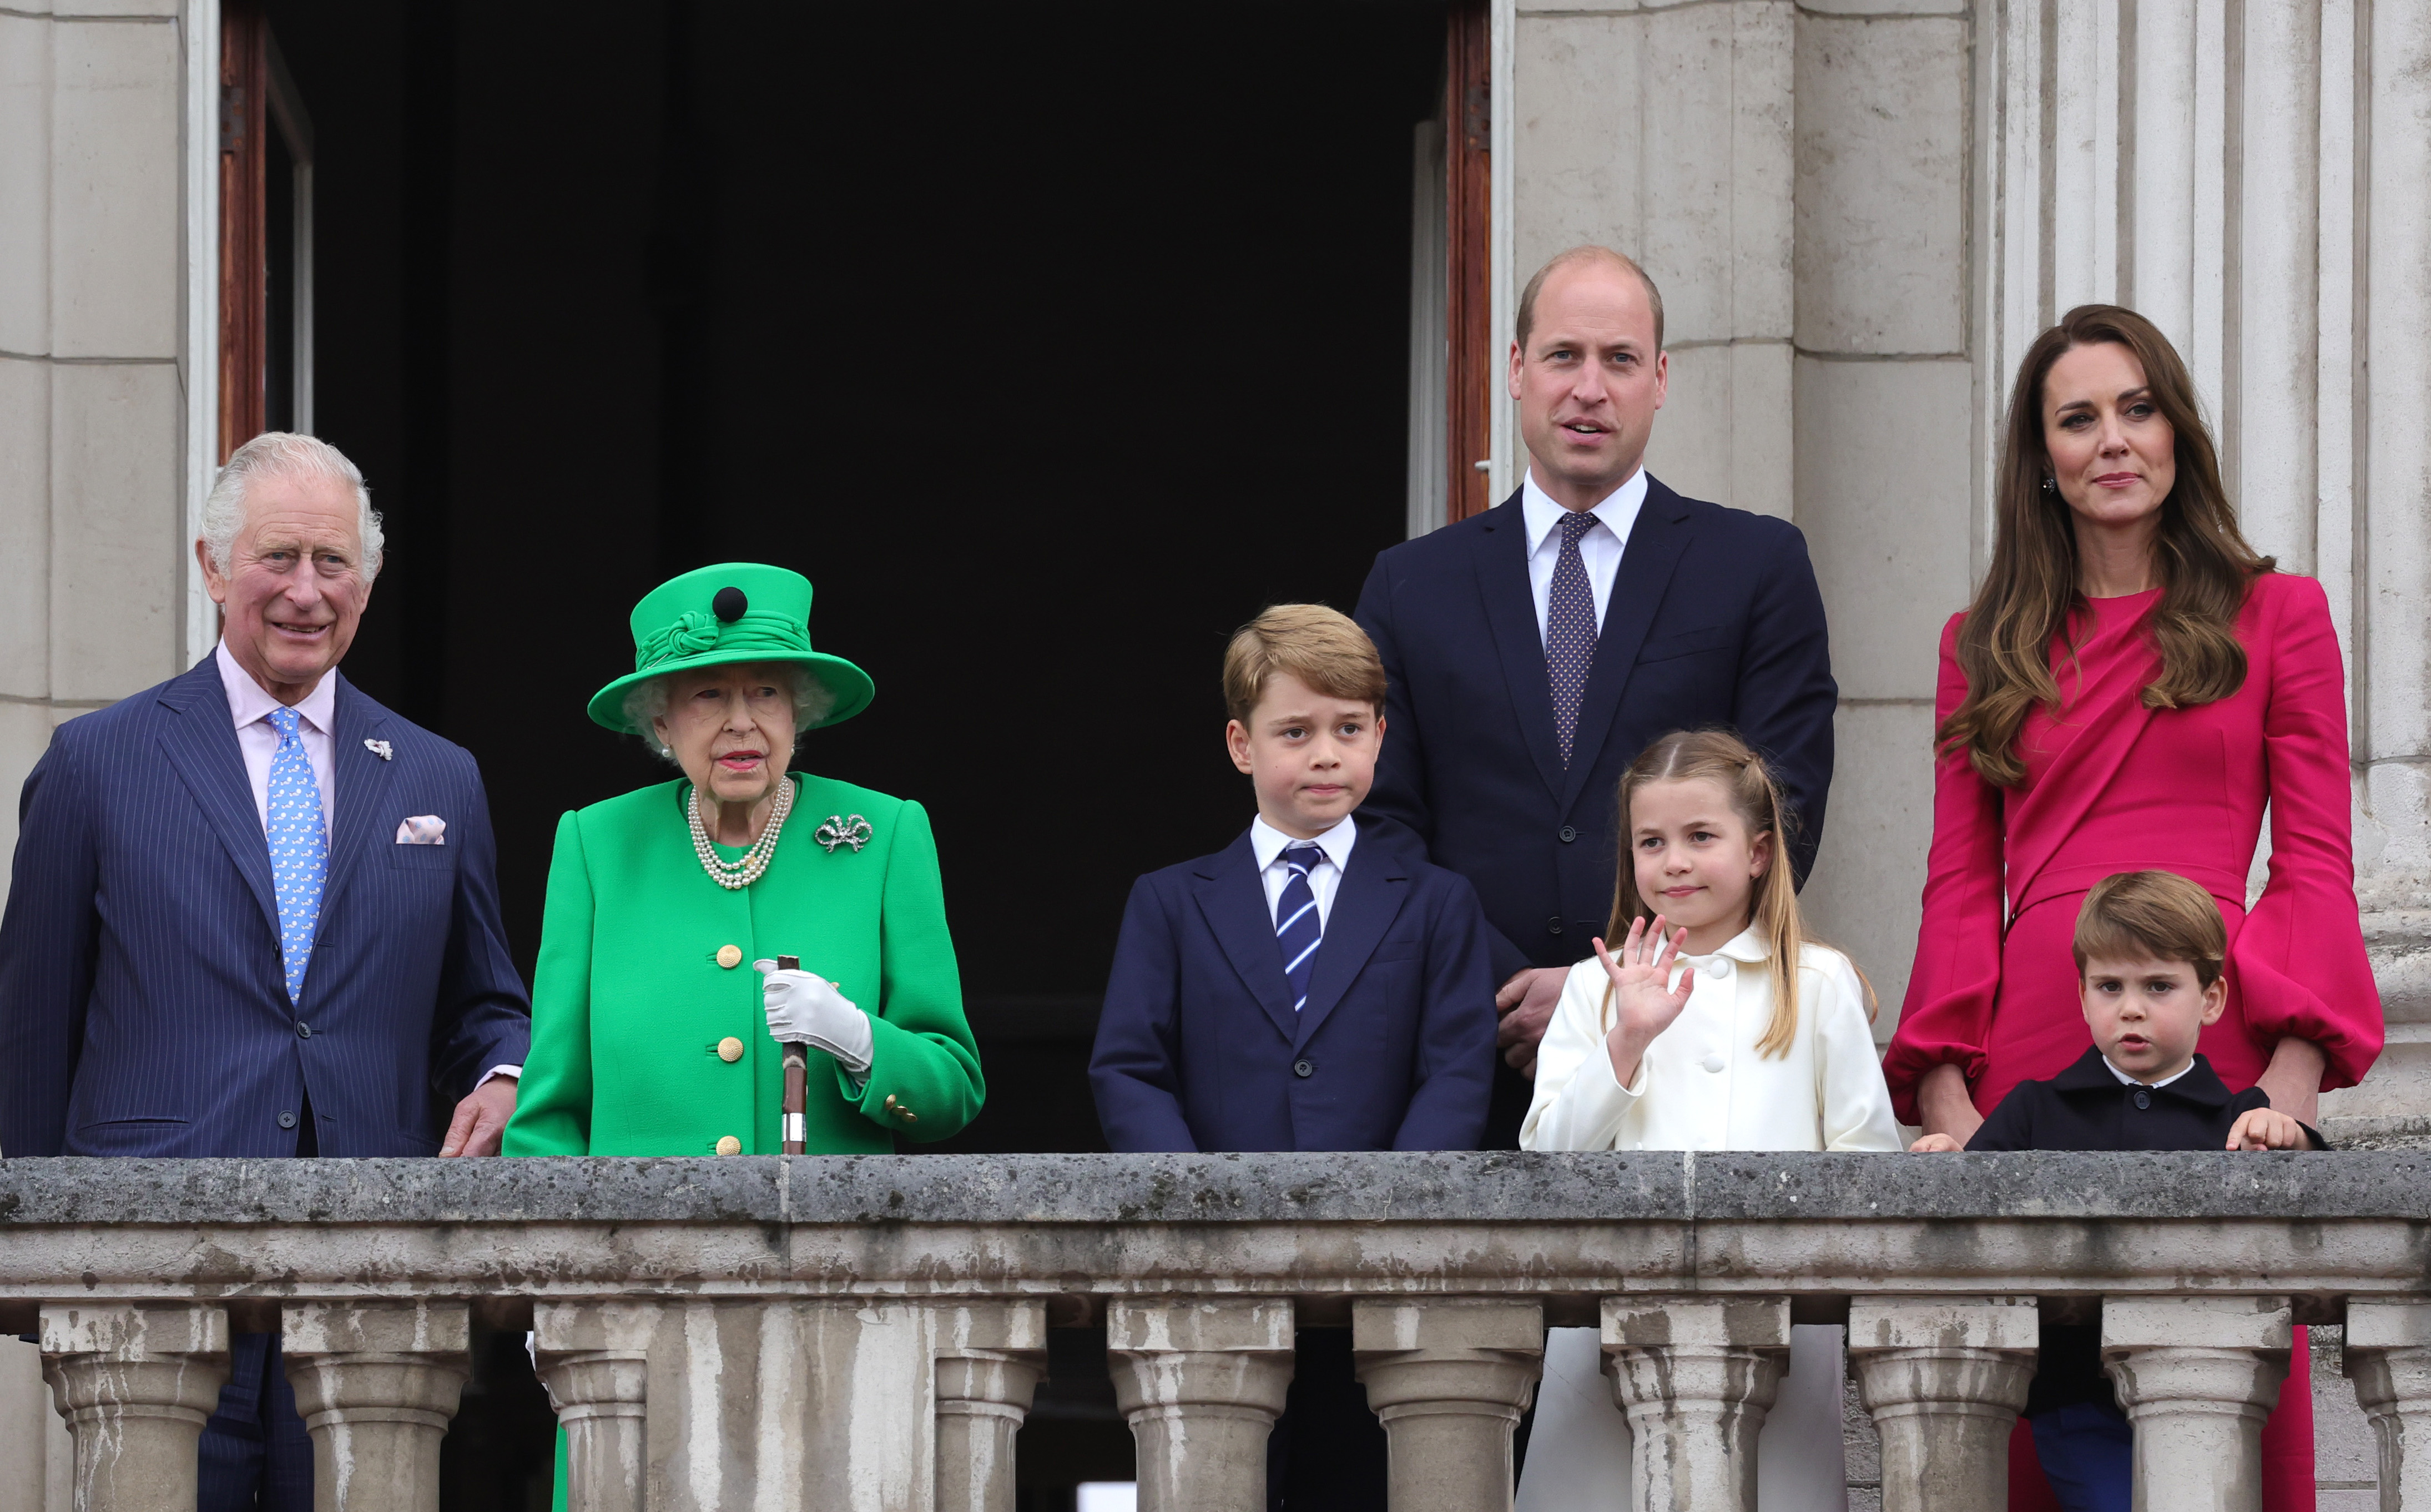 William with his family on the Palace balcony during the Platinum Jubilee